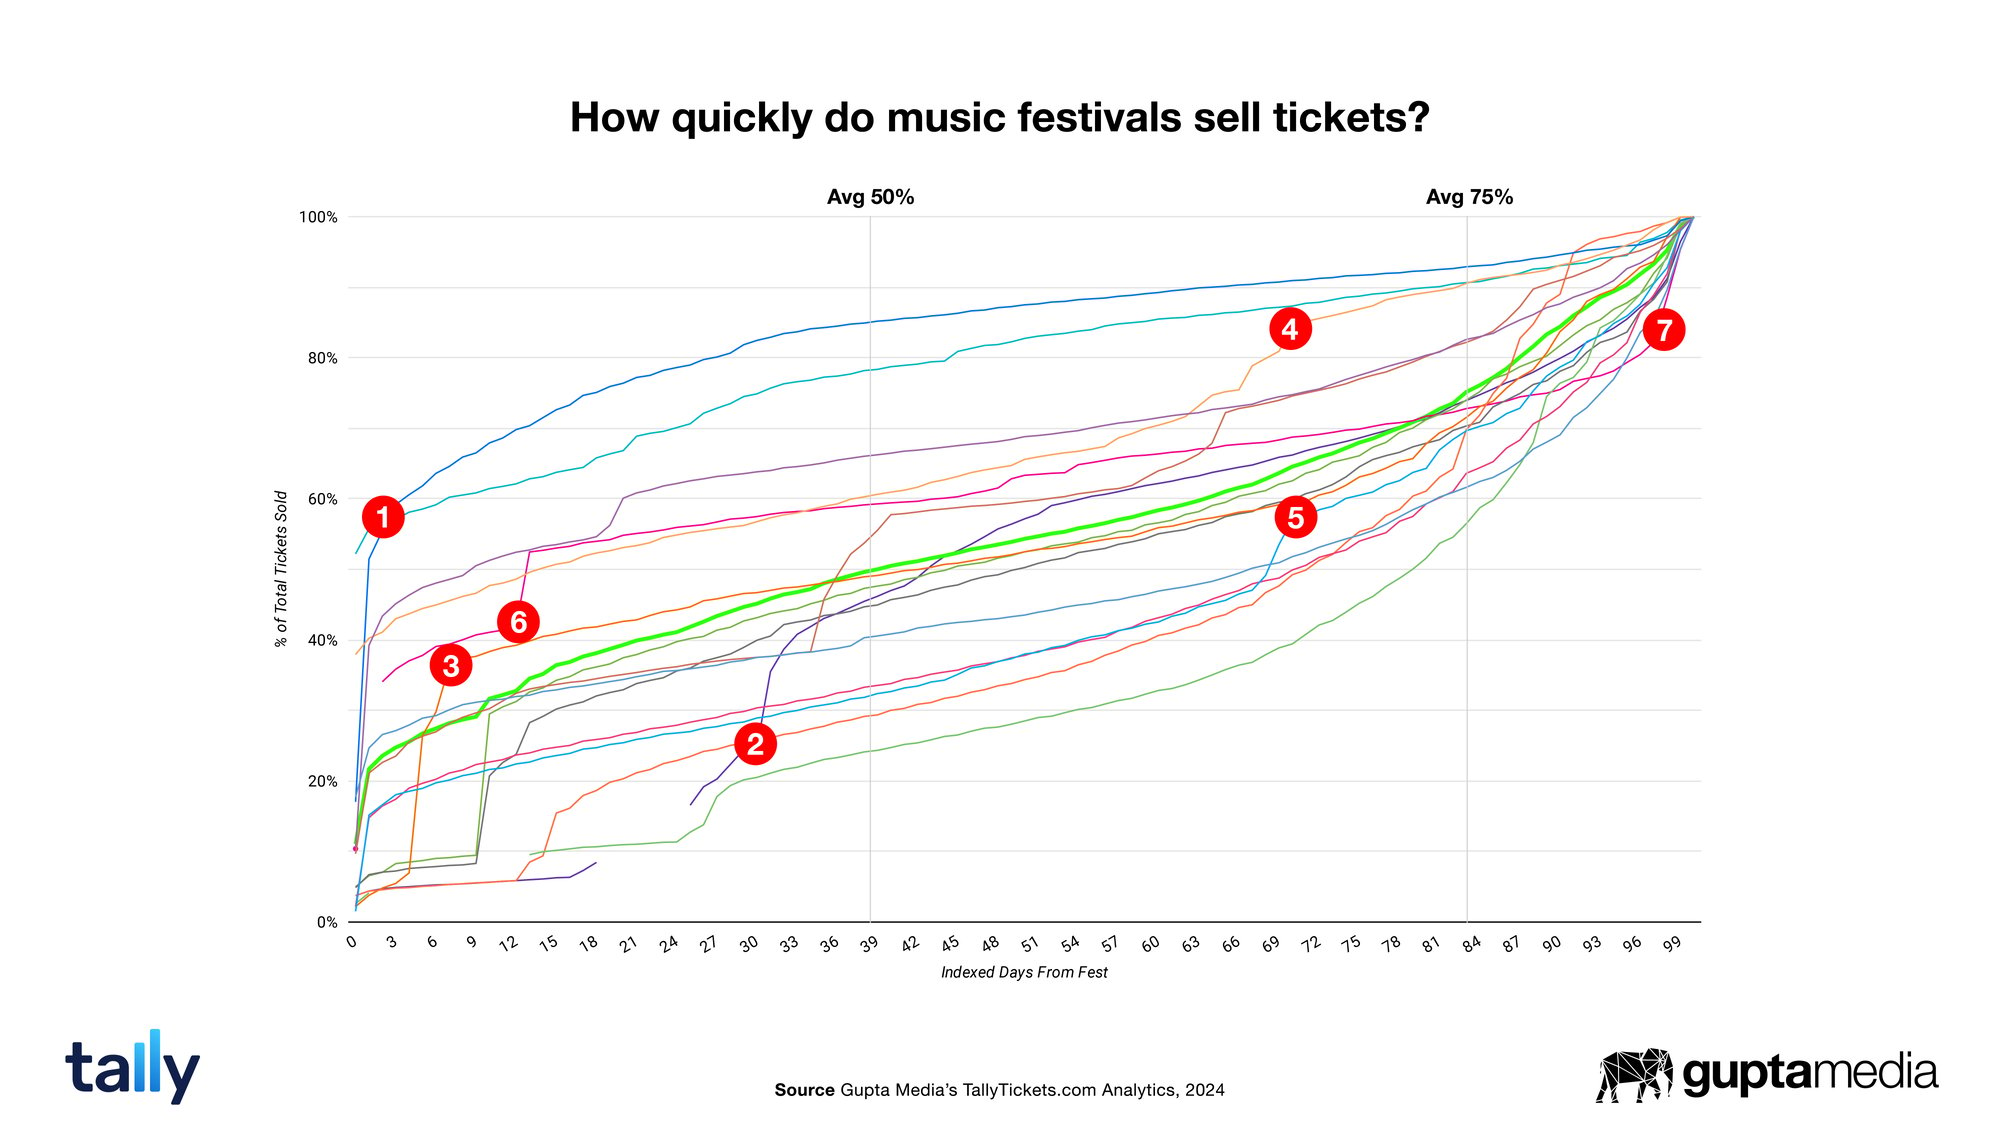 Data: How quickly do music festivals sell tickets?